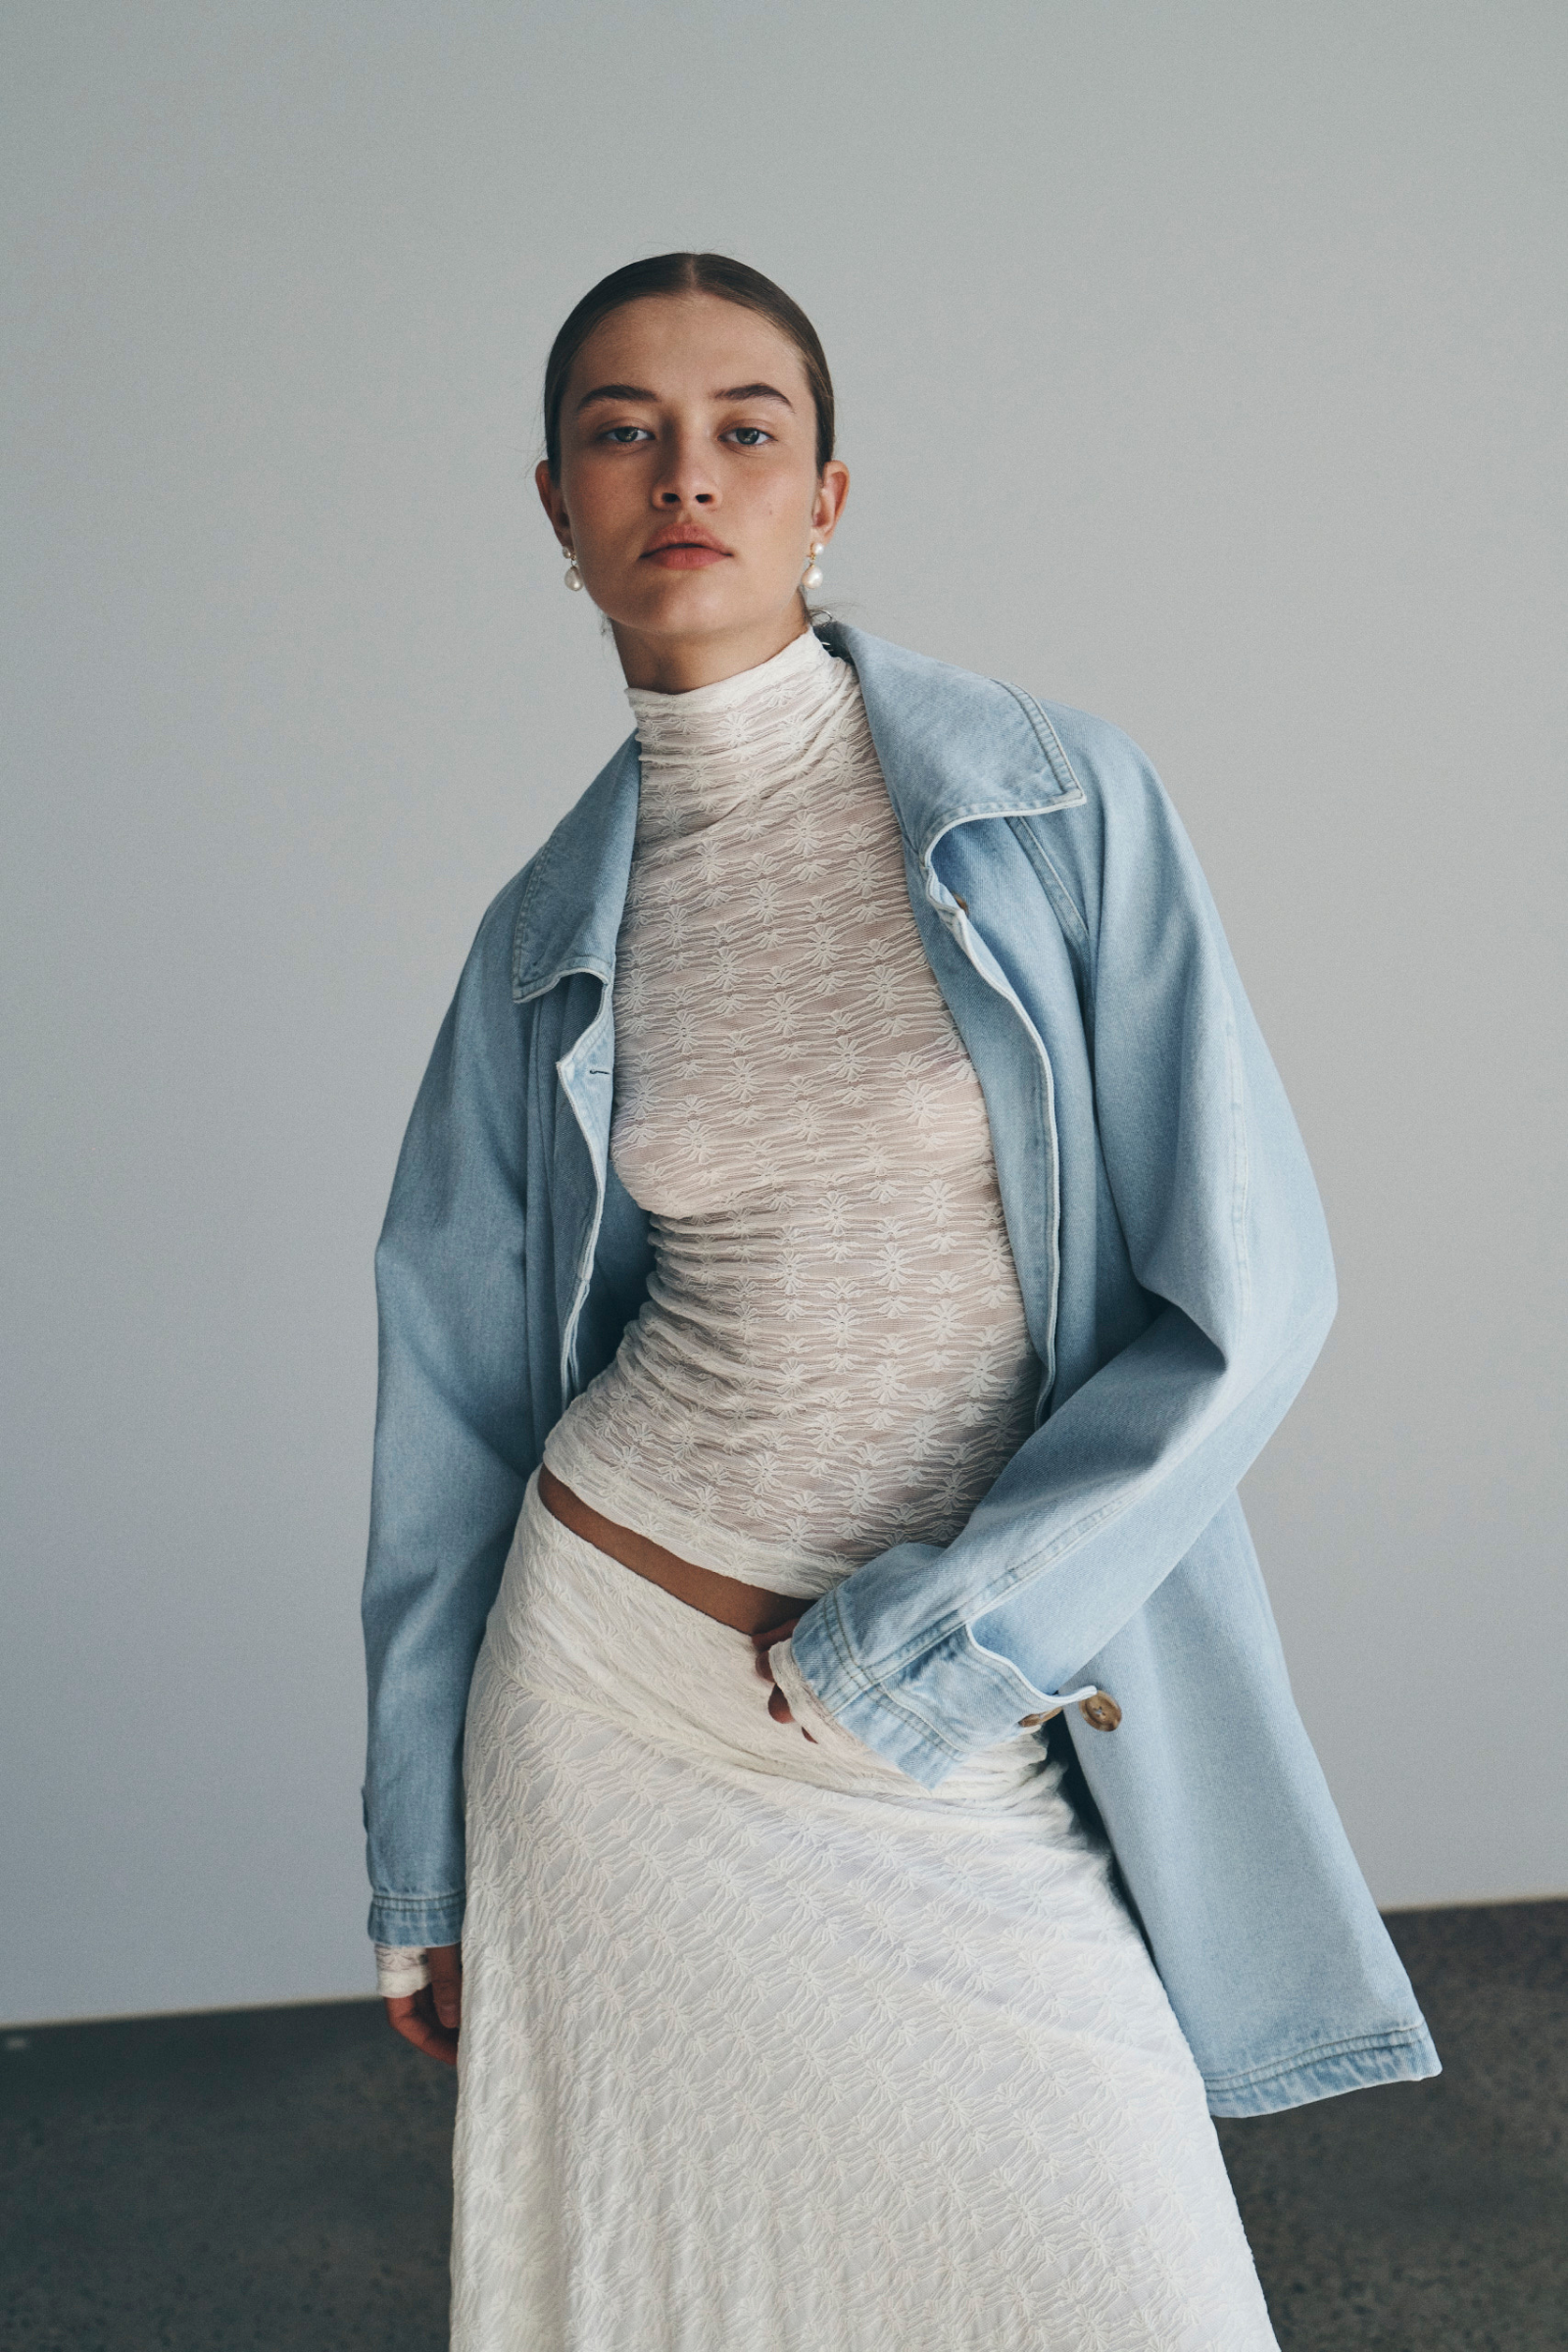 Bianca wears the Valentina Trench Jacket in Washed Denim over the Galo Flower Lace Top and Lydia Flow Lace Midi Skirt, both in Creme. She accessorises with pearl drop earrings and completes the look with a low, slick bun. 